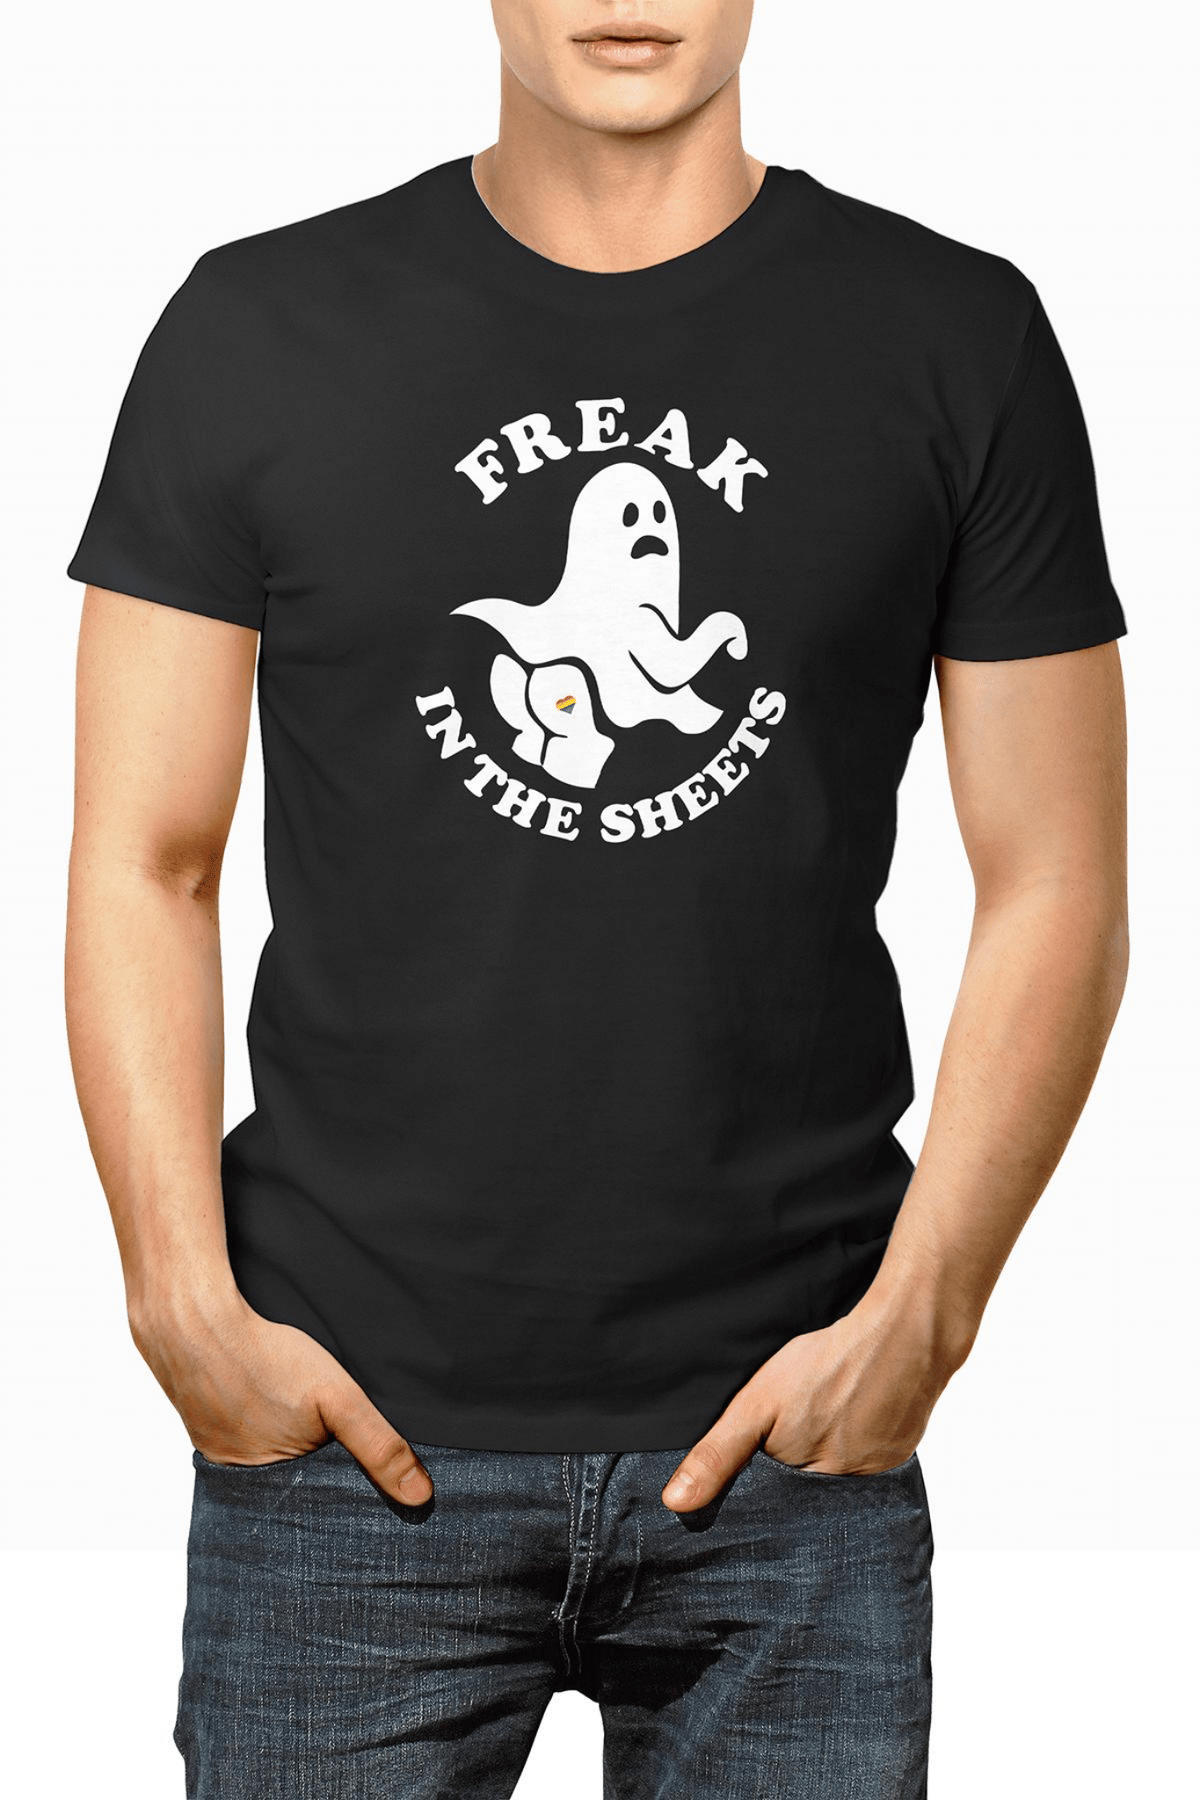 LowTee Freak In The Sheets Graphic Tee